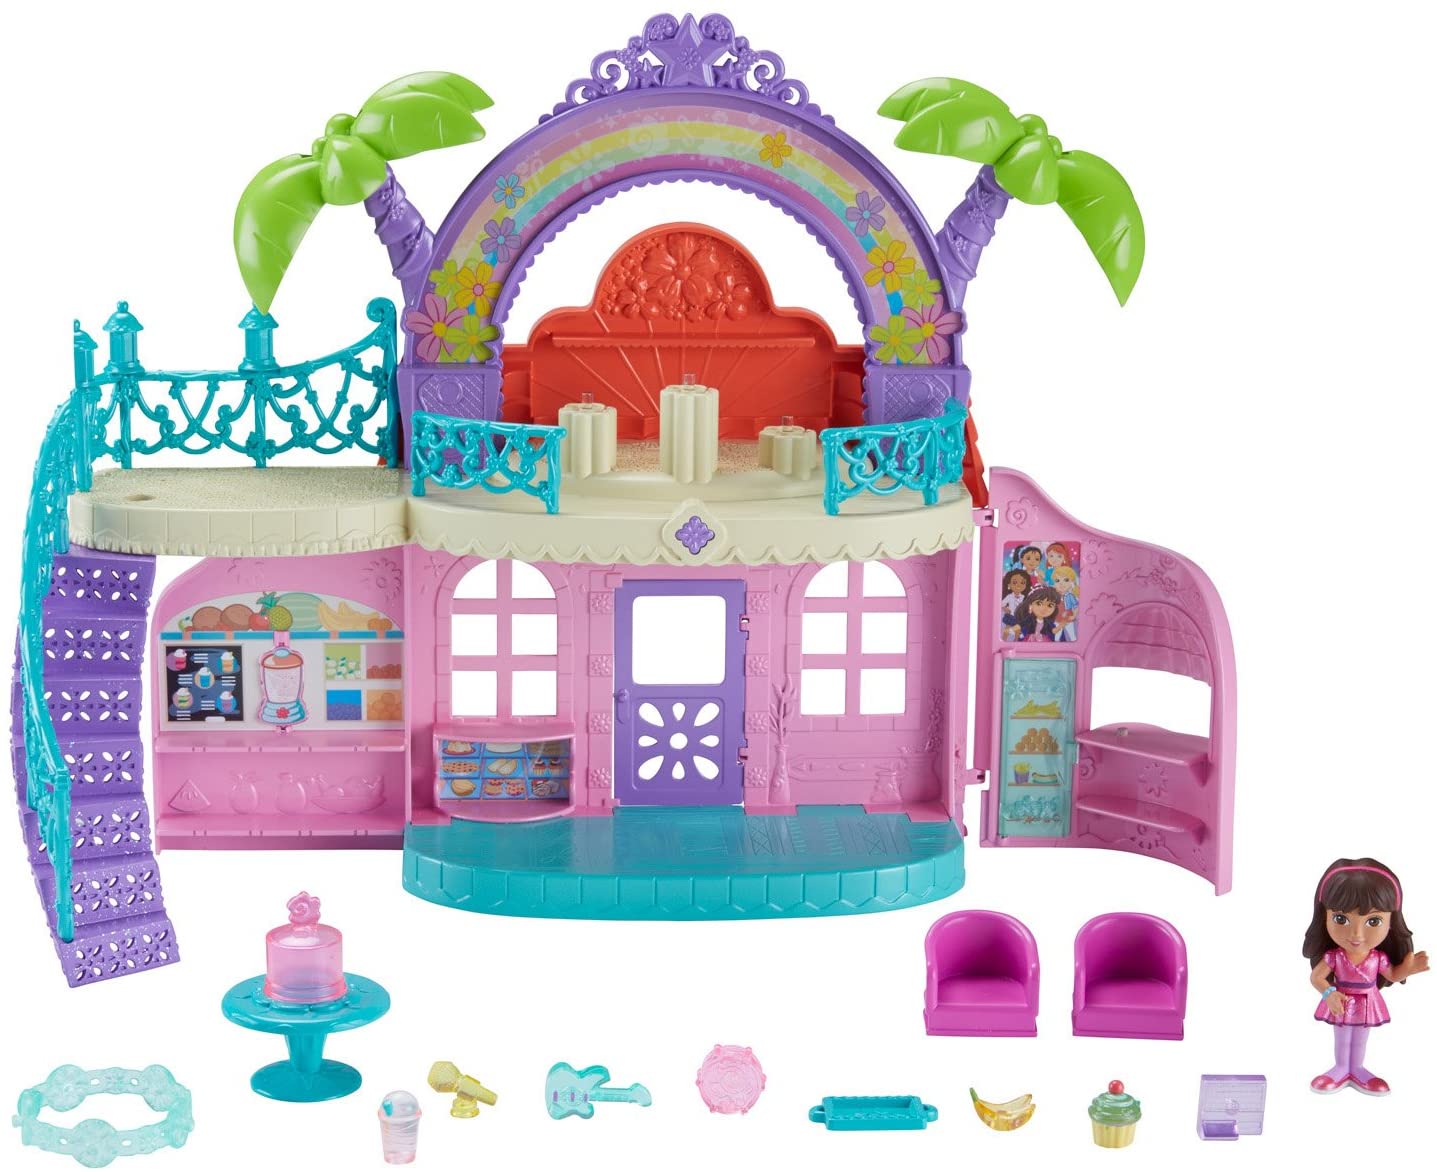 9 Best Fisher Price Dollhouse Reviews of 2023 6